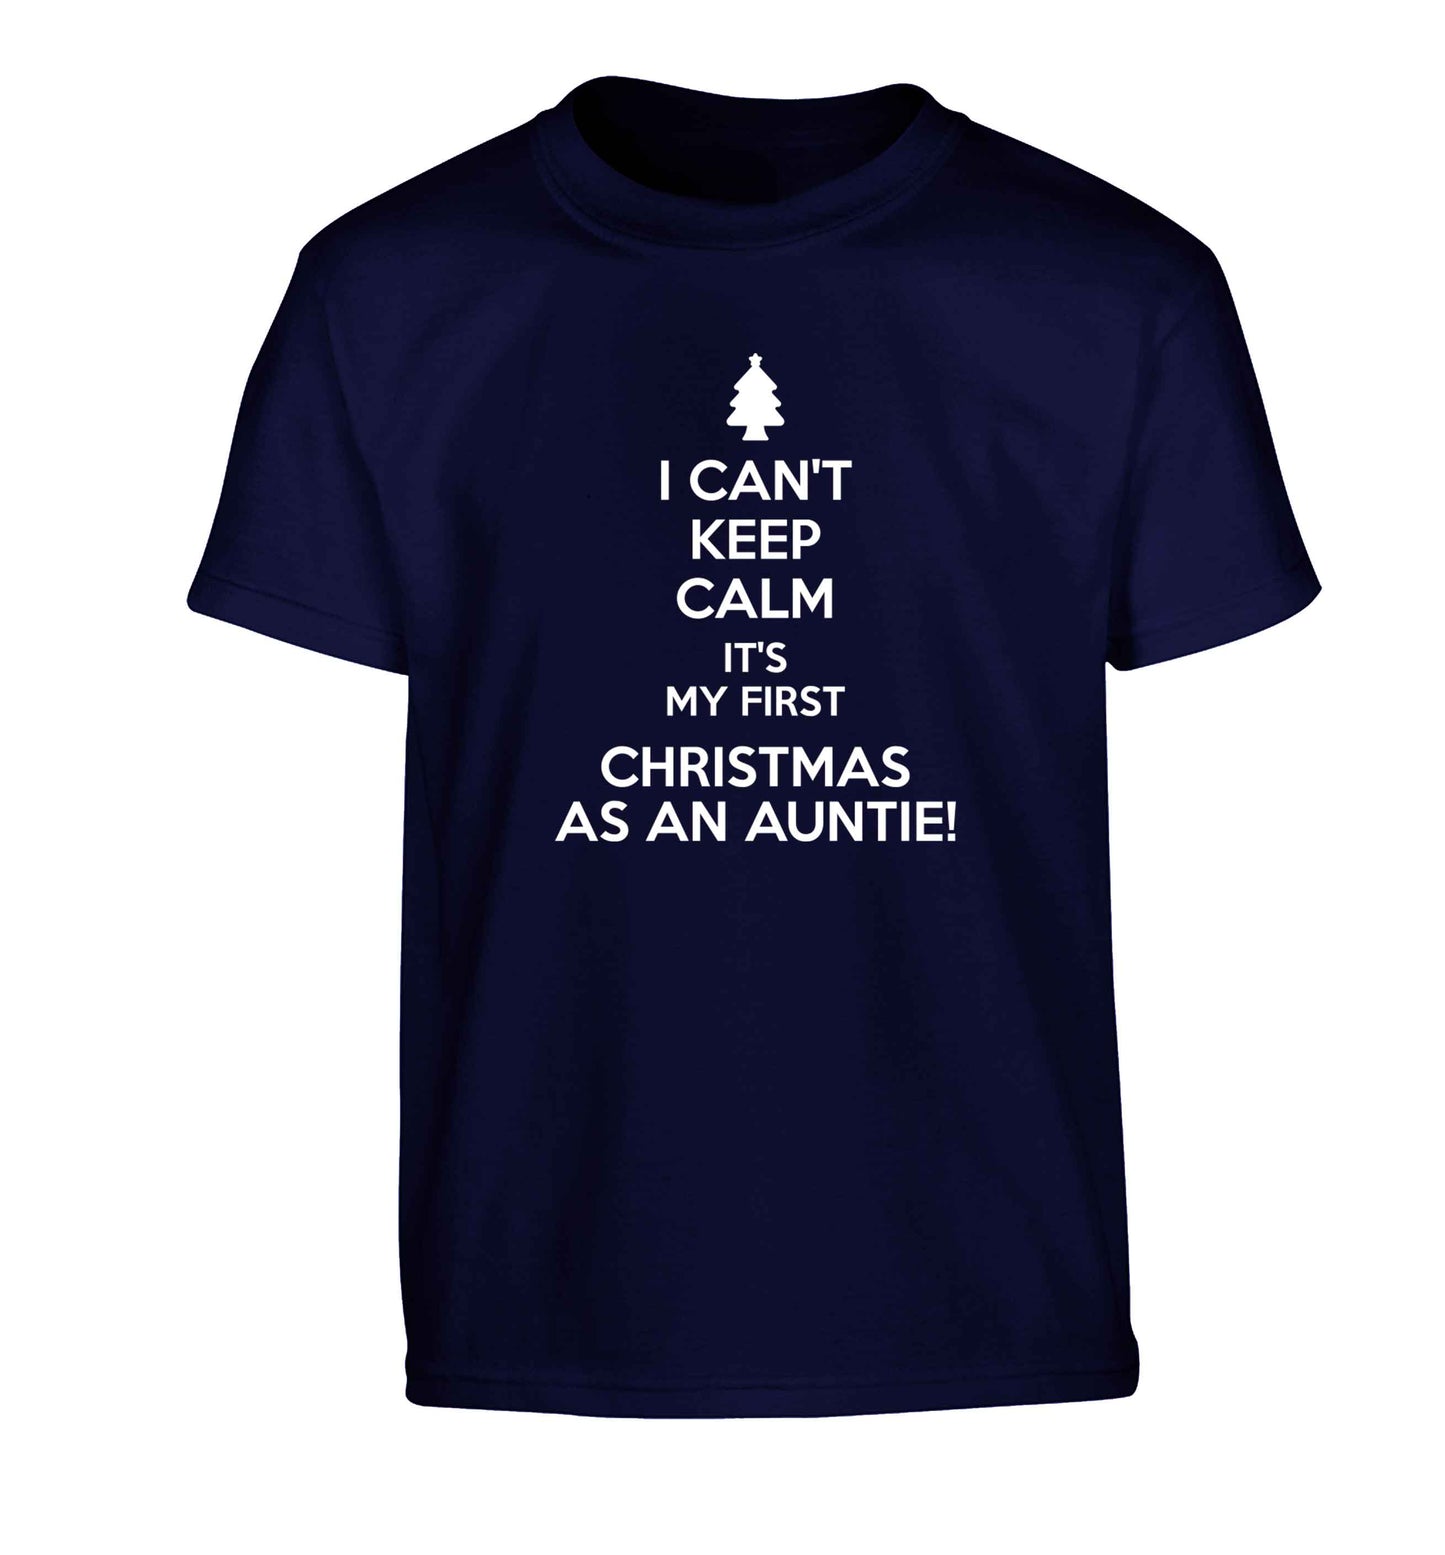 I can't keep calm it's my first Christmas as an auntie! Children's navy Tshirt 12-13 Years